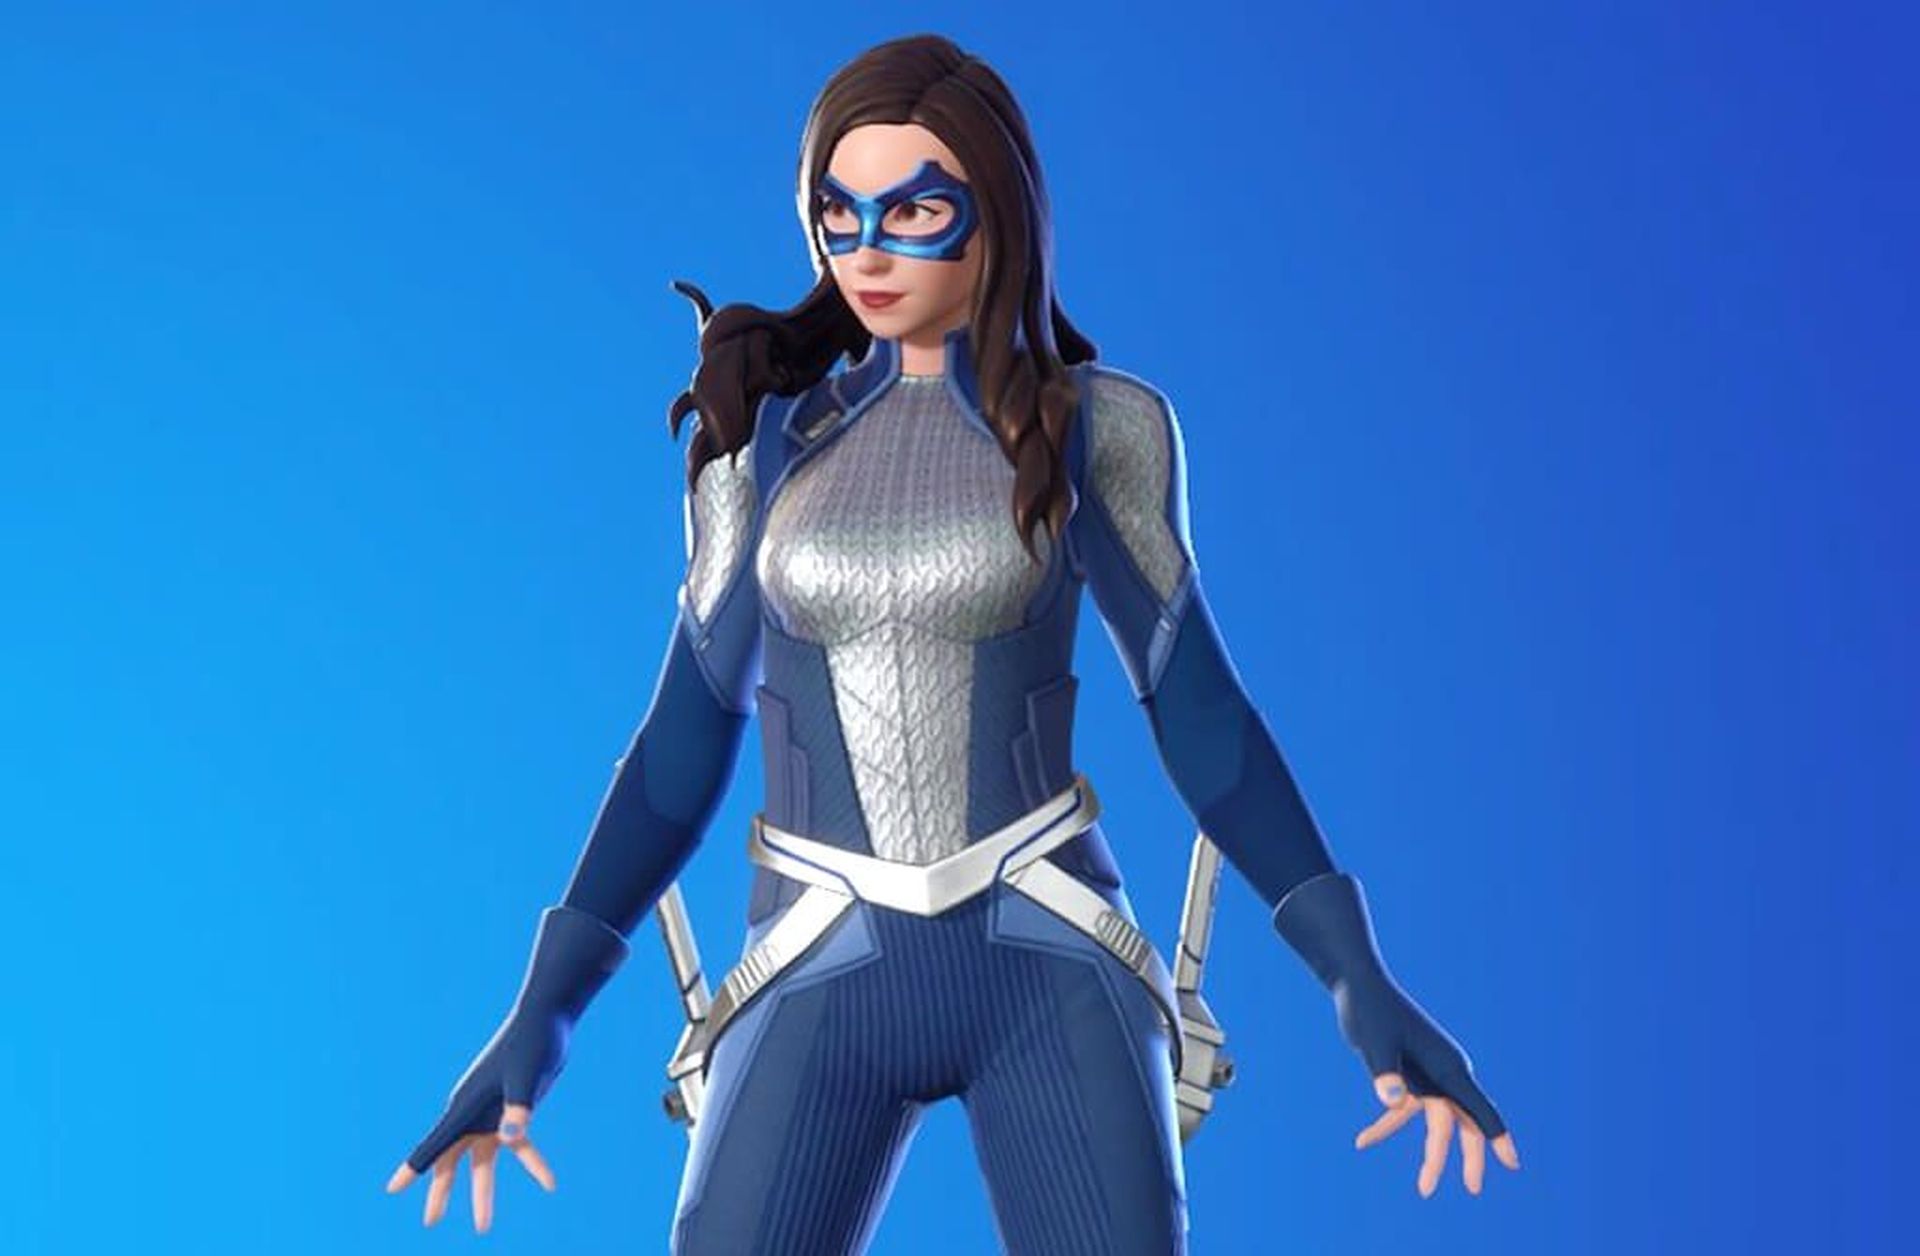 Epic Games took a big step and added DC's Draemer as the first Fortnite transgender character into the game with this year's Rainbow Royale event.